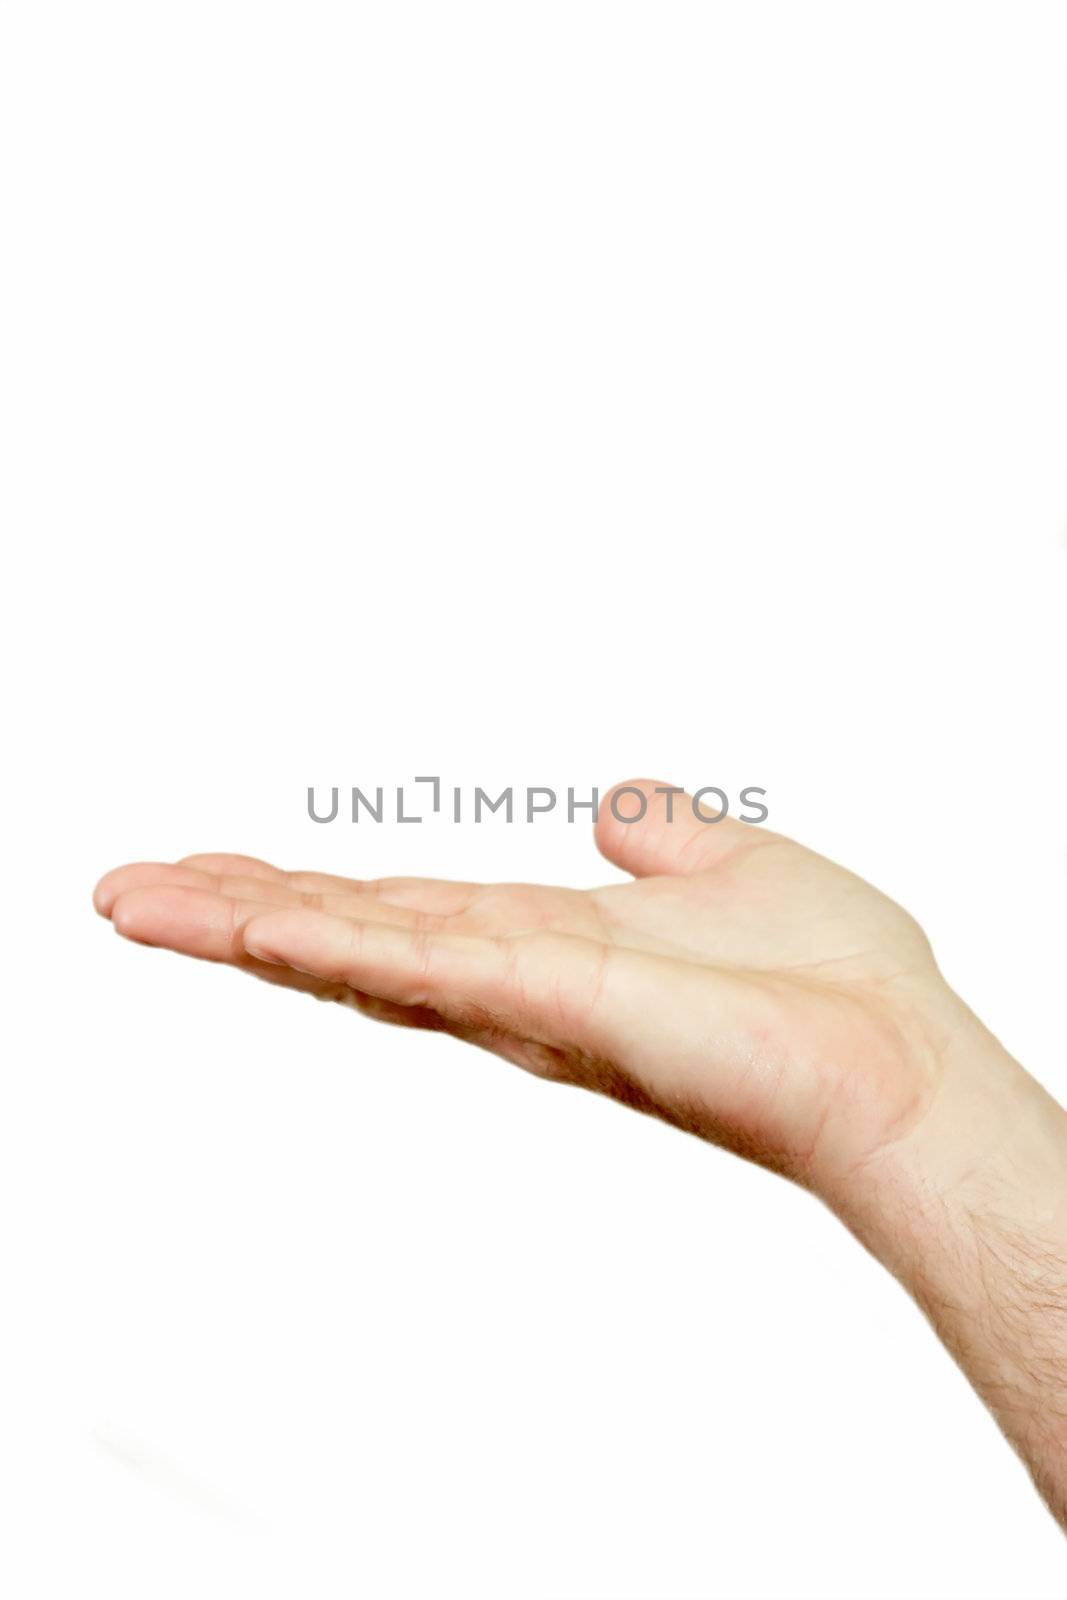 The mens hand located on a white background
